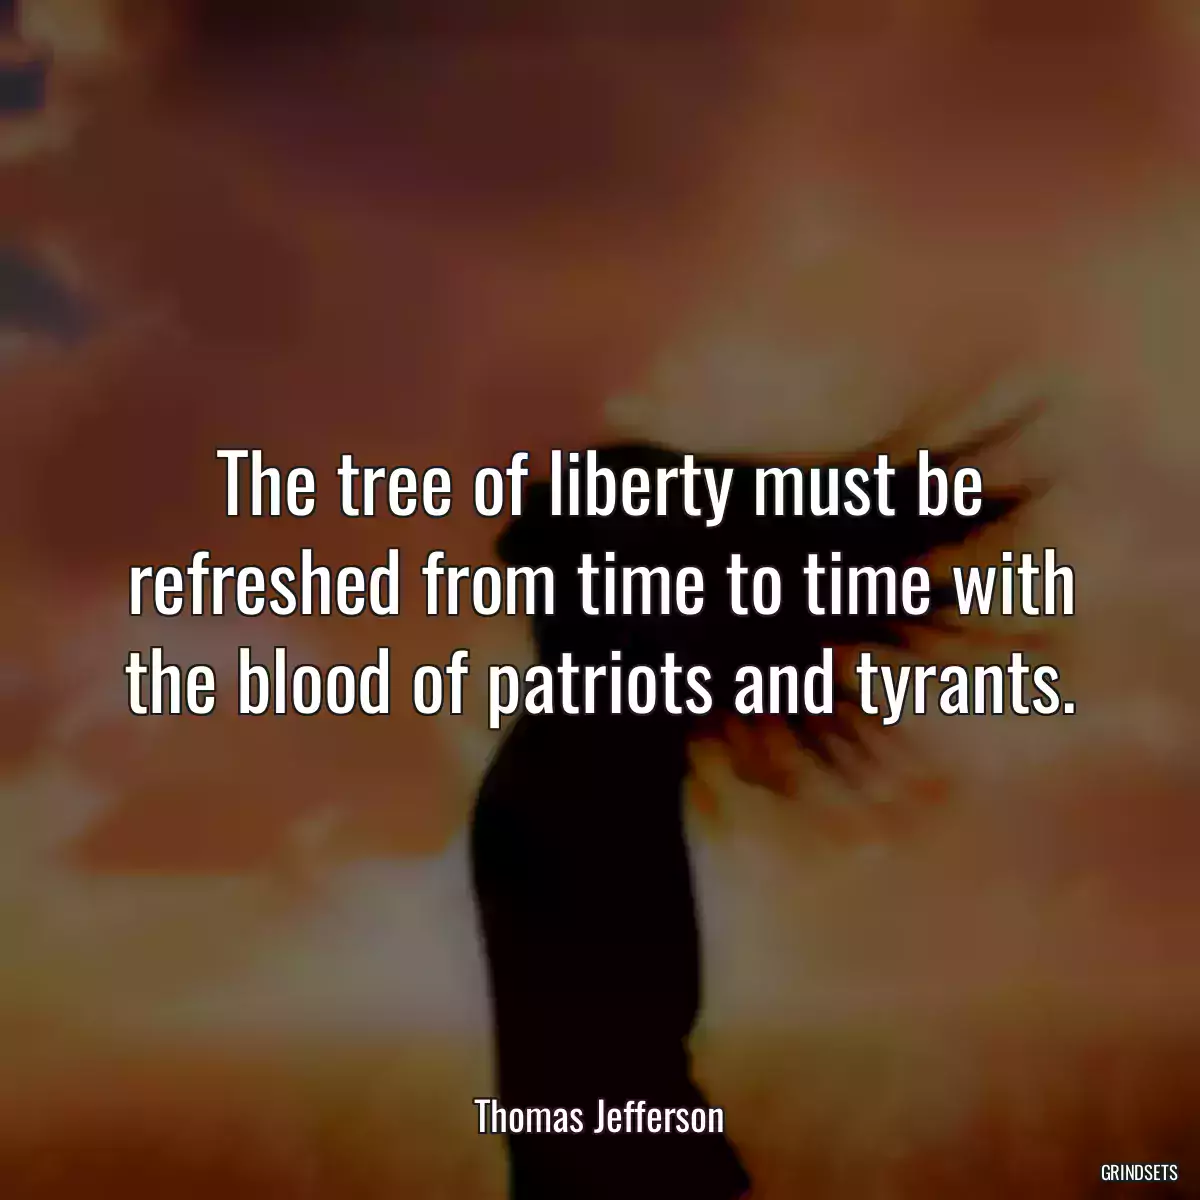 The tree of liberty must be refreshed from time to time with the blood of patriots and tyrants.